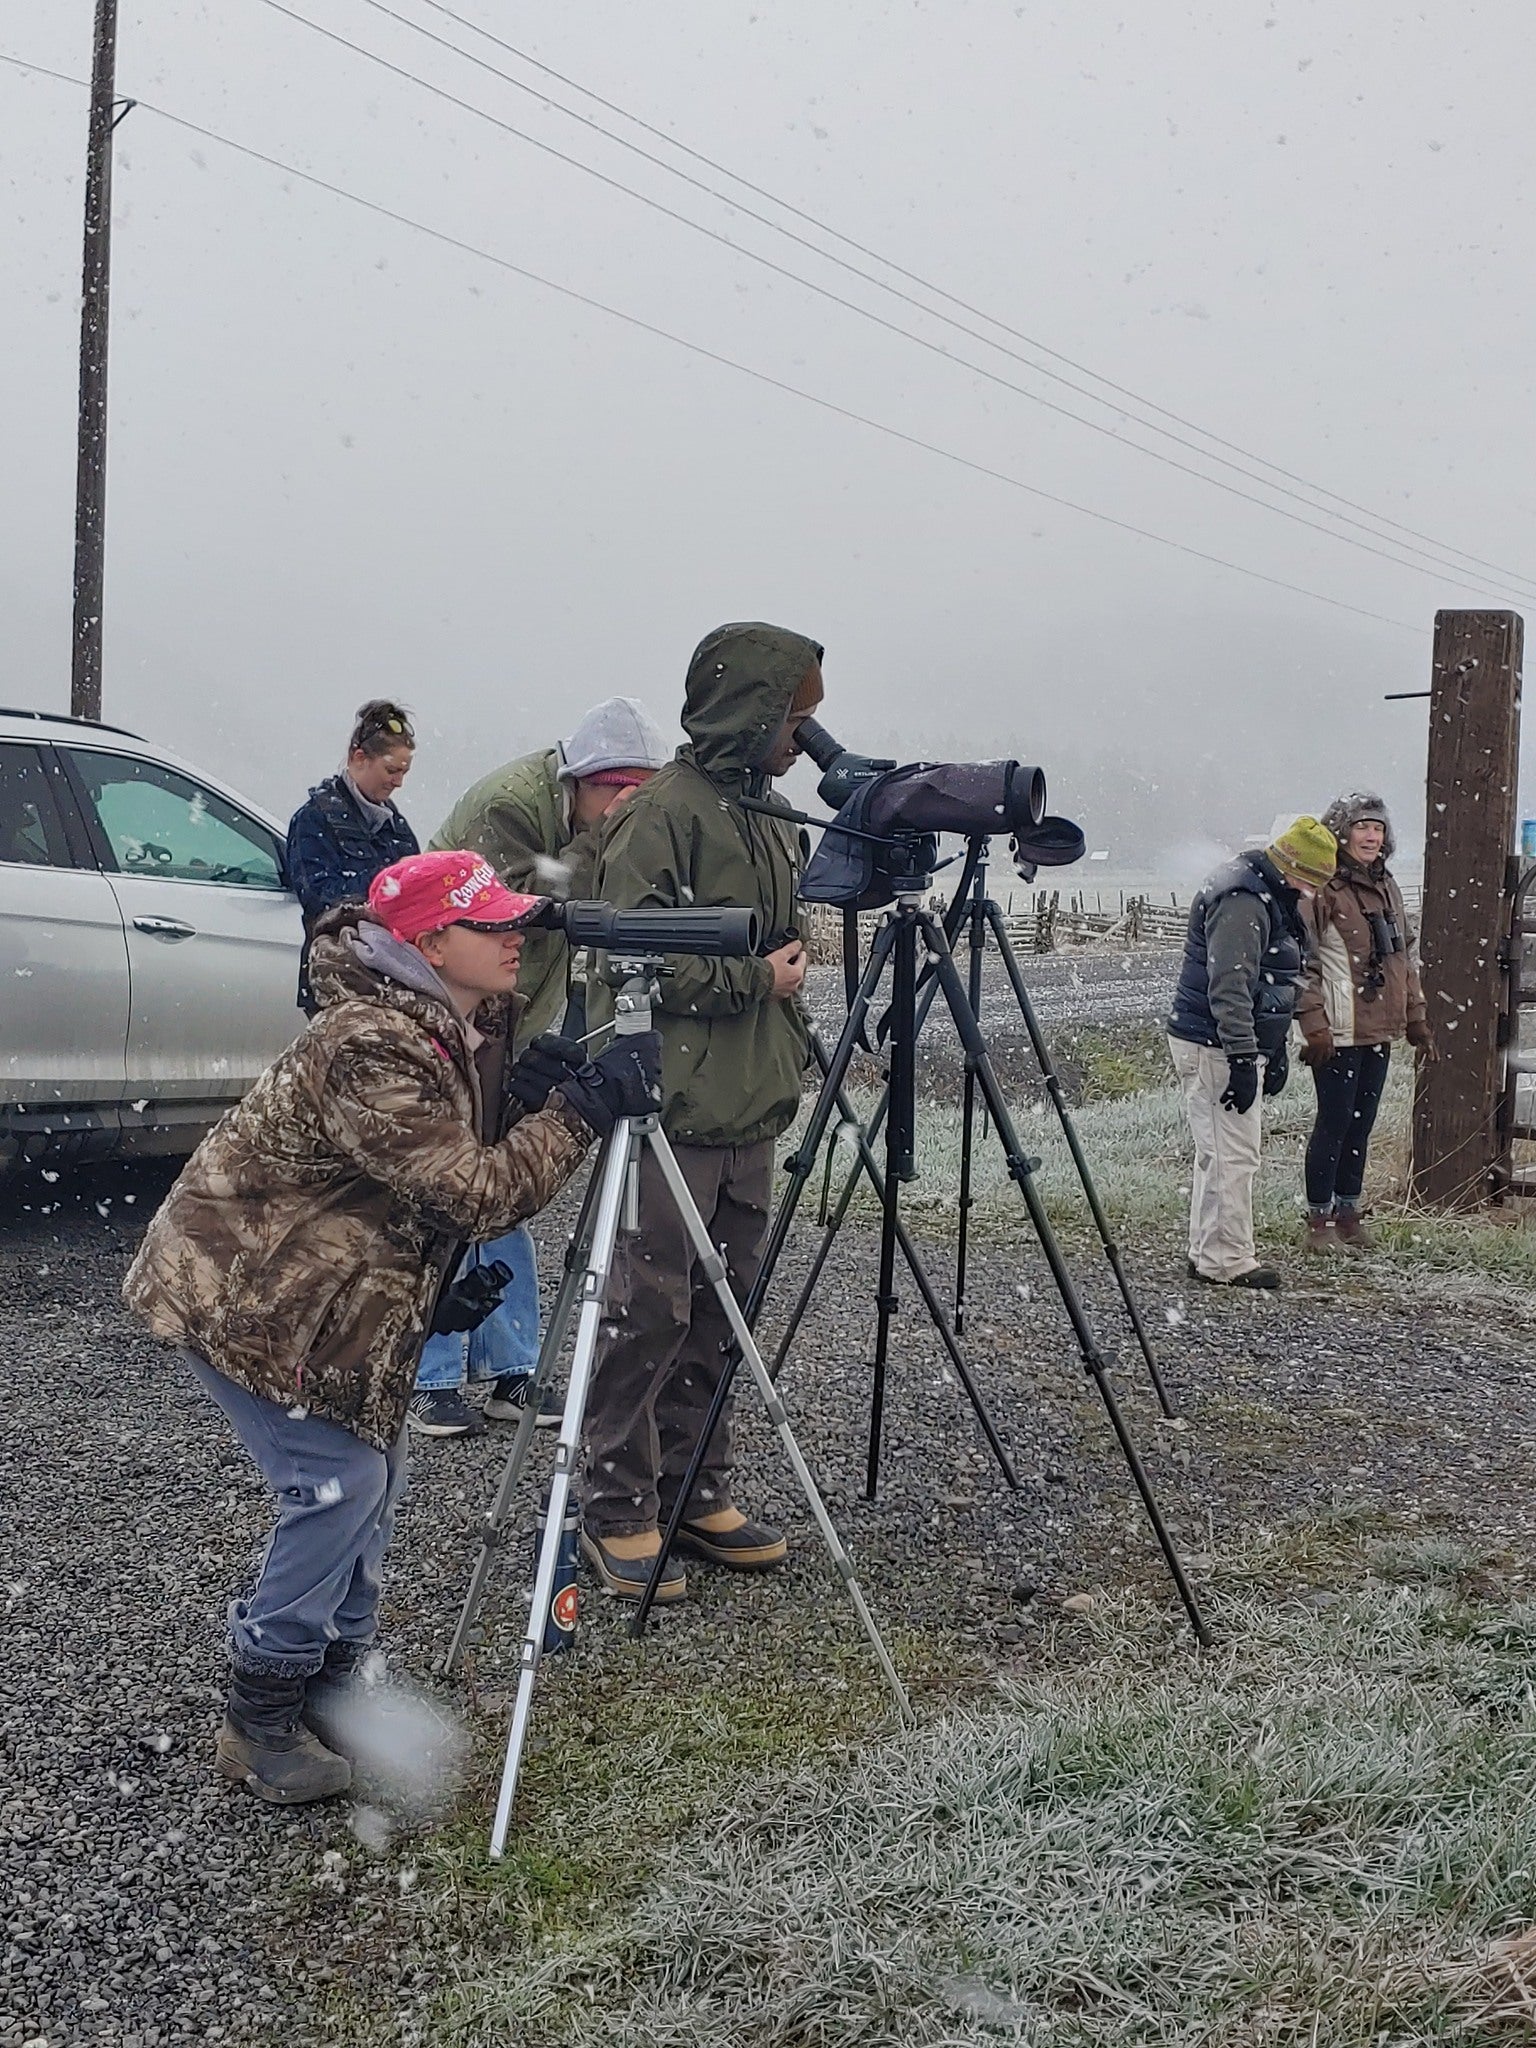 a group of adults stand bundled up in jackets and hats. snowflakes are falling as they look through spotting scopes toward curlews off camera